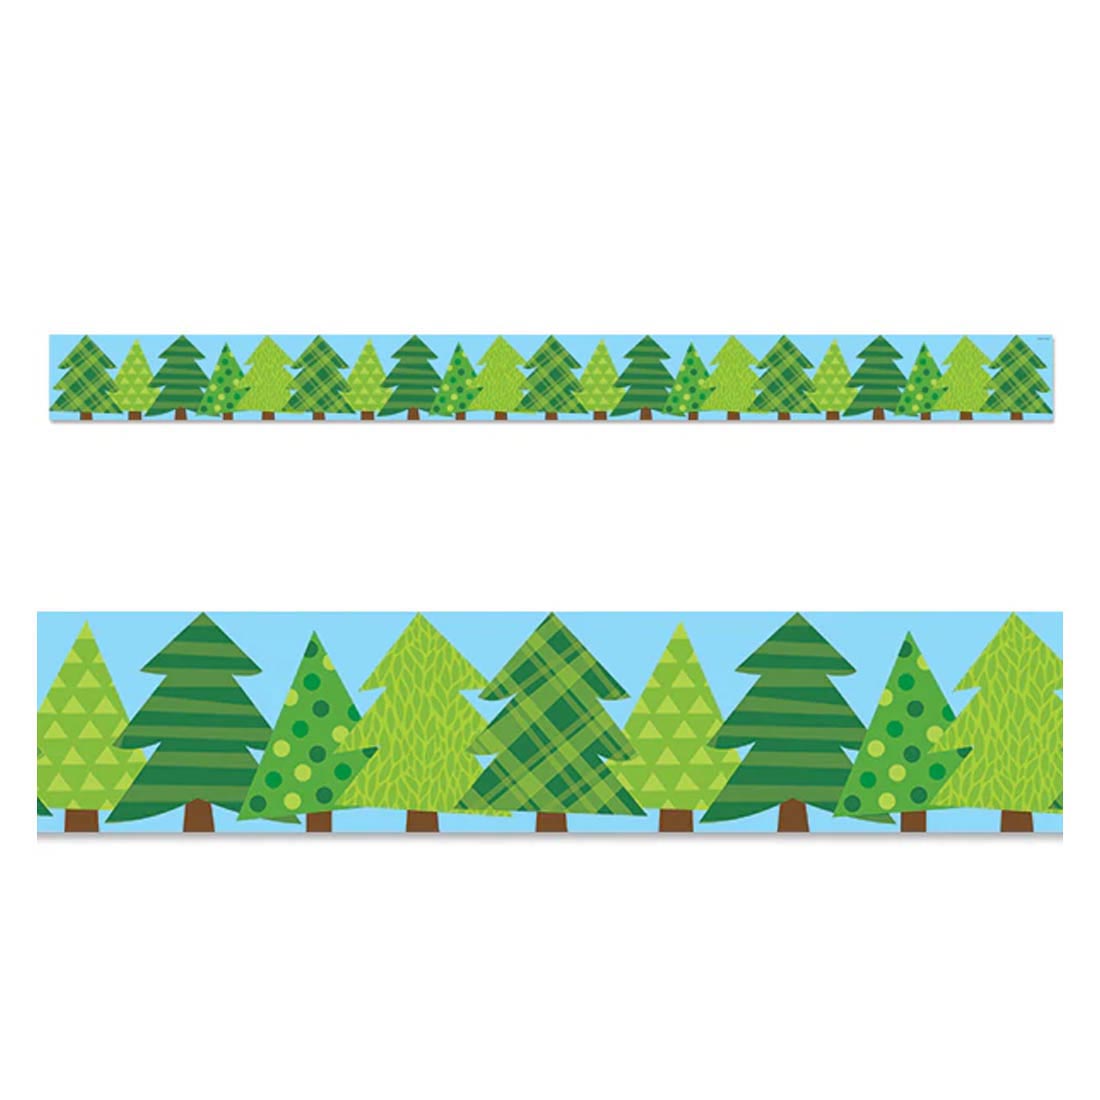 Woodland Friends Patterned Pine Trees EZ Border By Creative Teaching Press